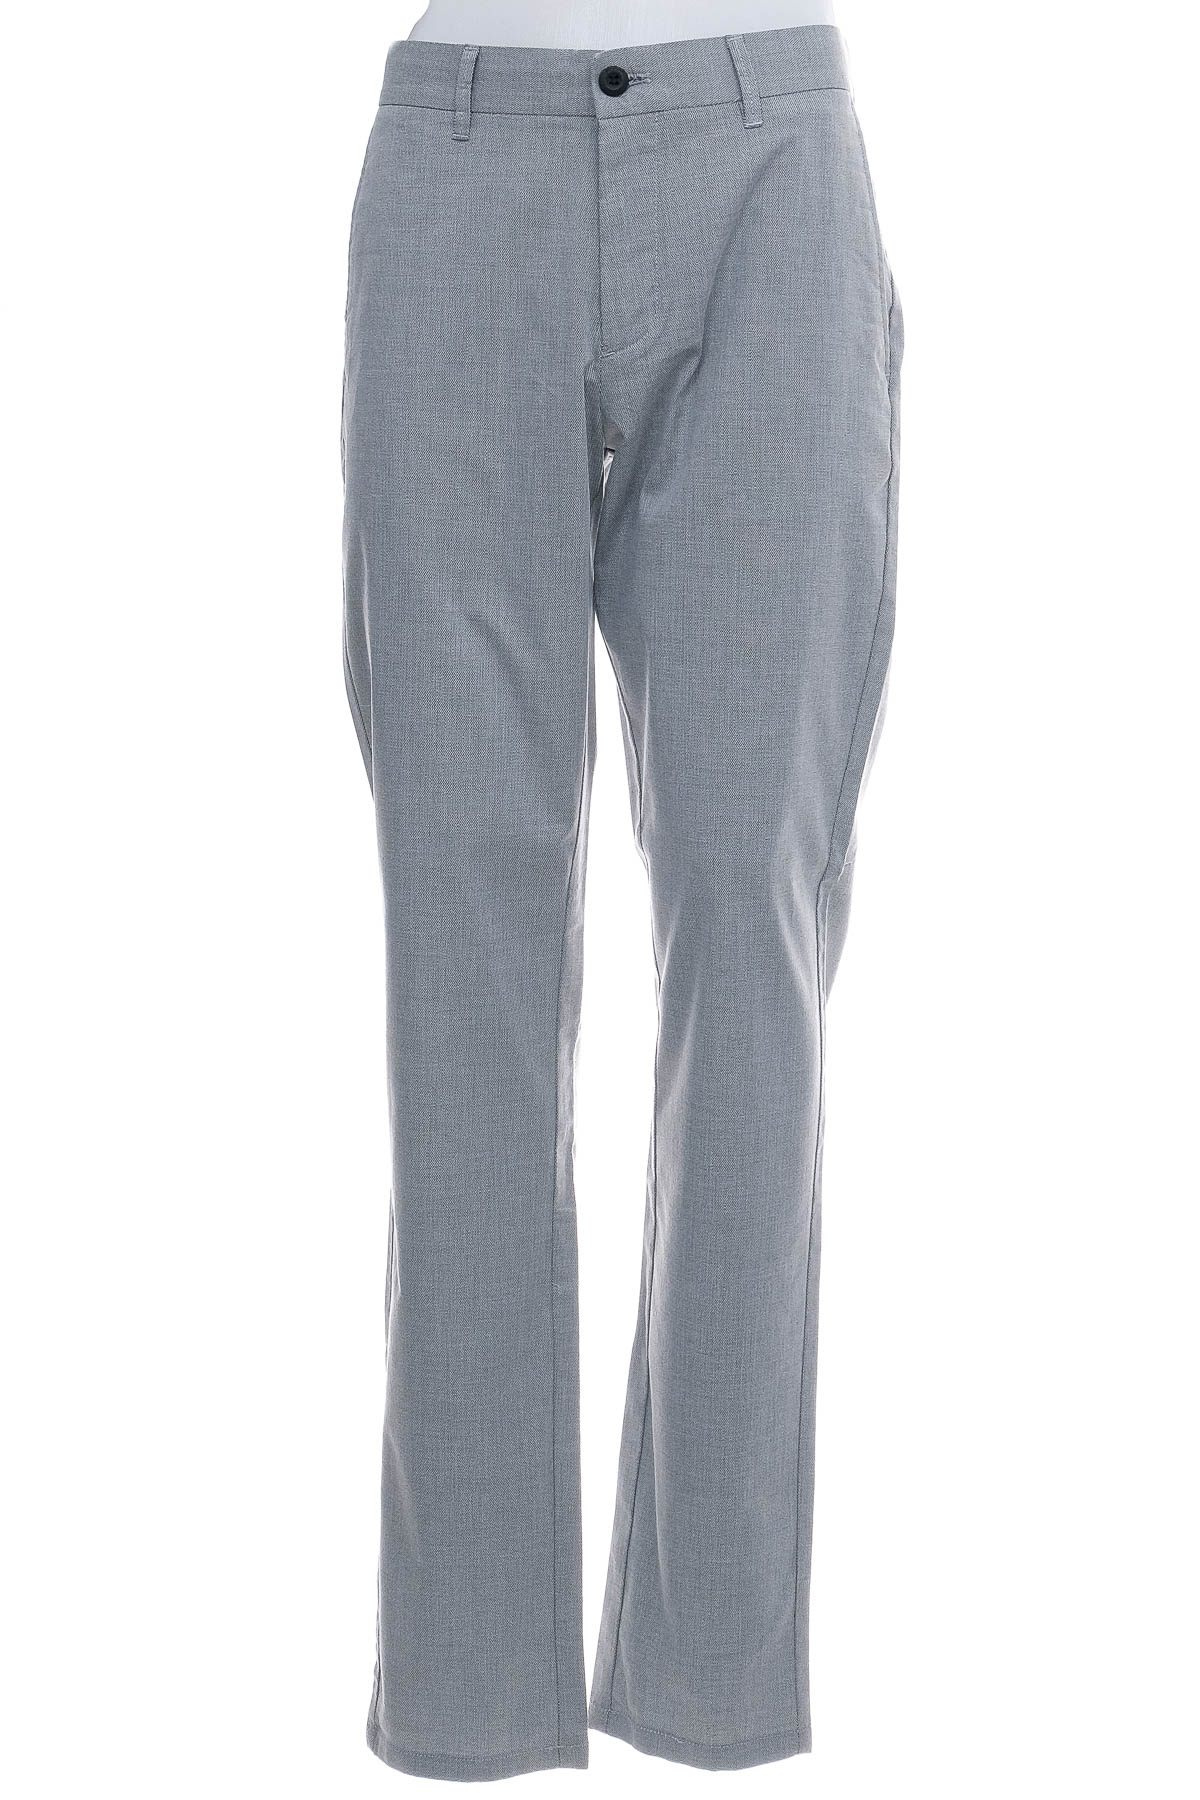 Men's trousers - Armand Thiery - 0